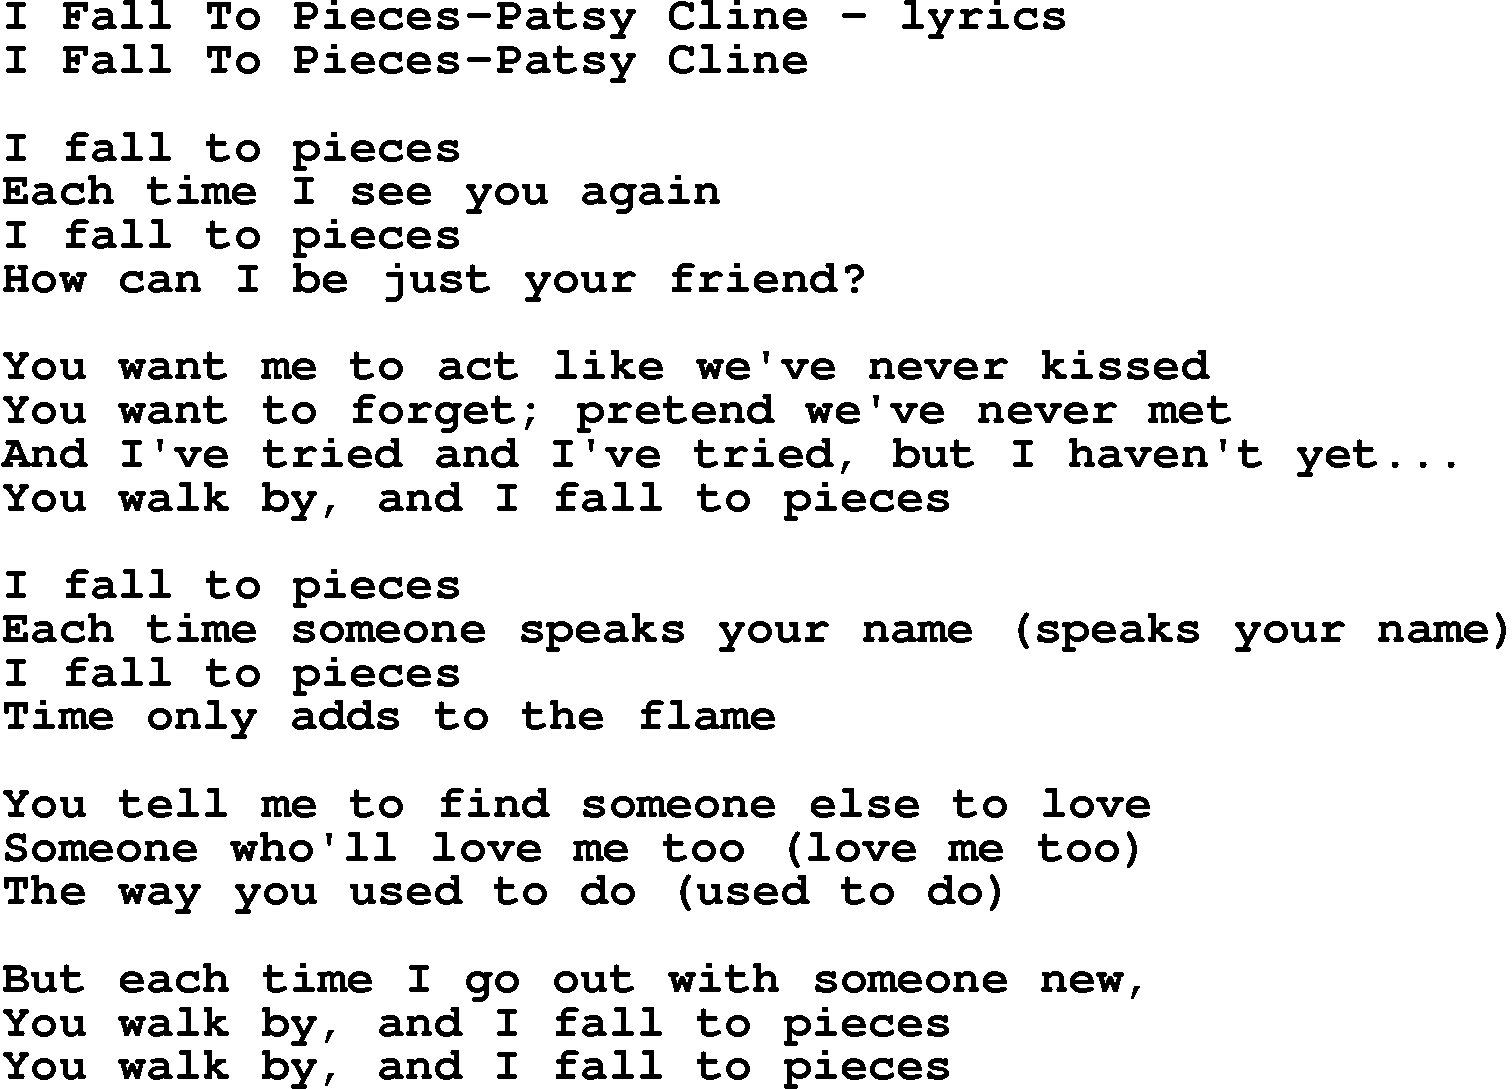 Love Song Lyrics for: I Fall To Pieces-Patsy Cline